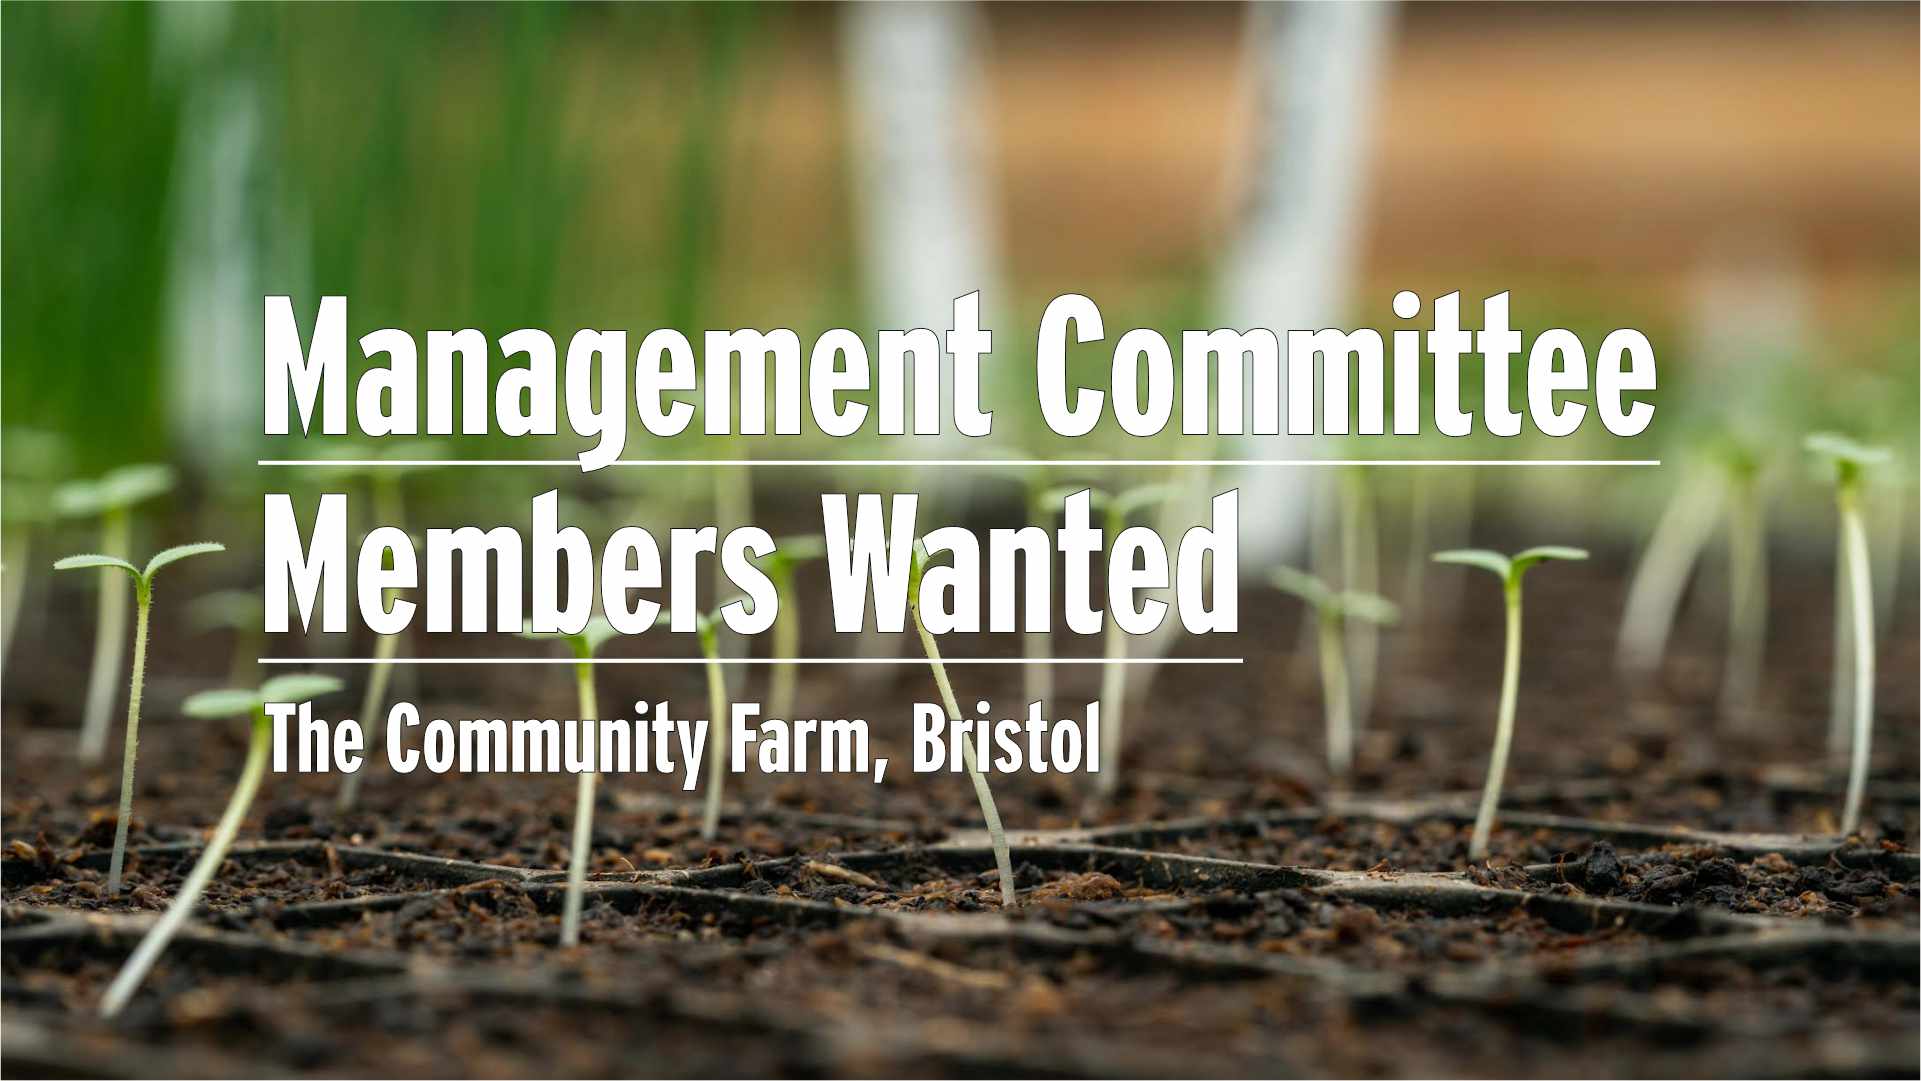 Community Farm - Management Committee - Image